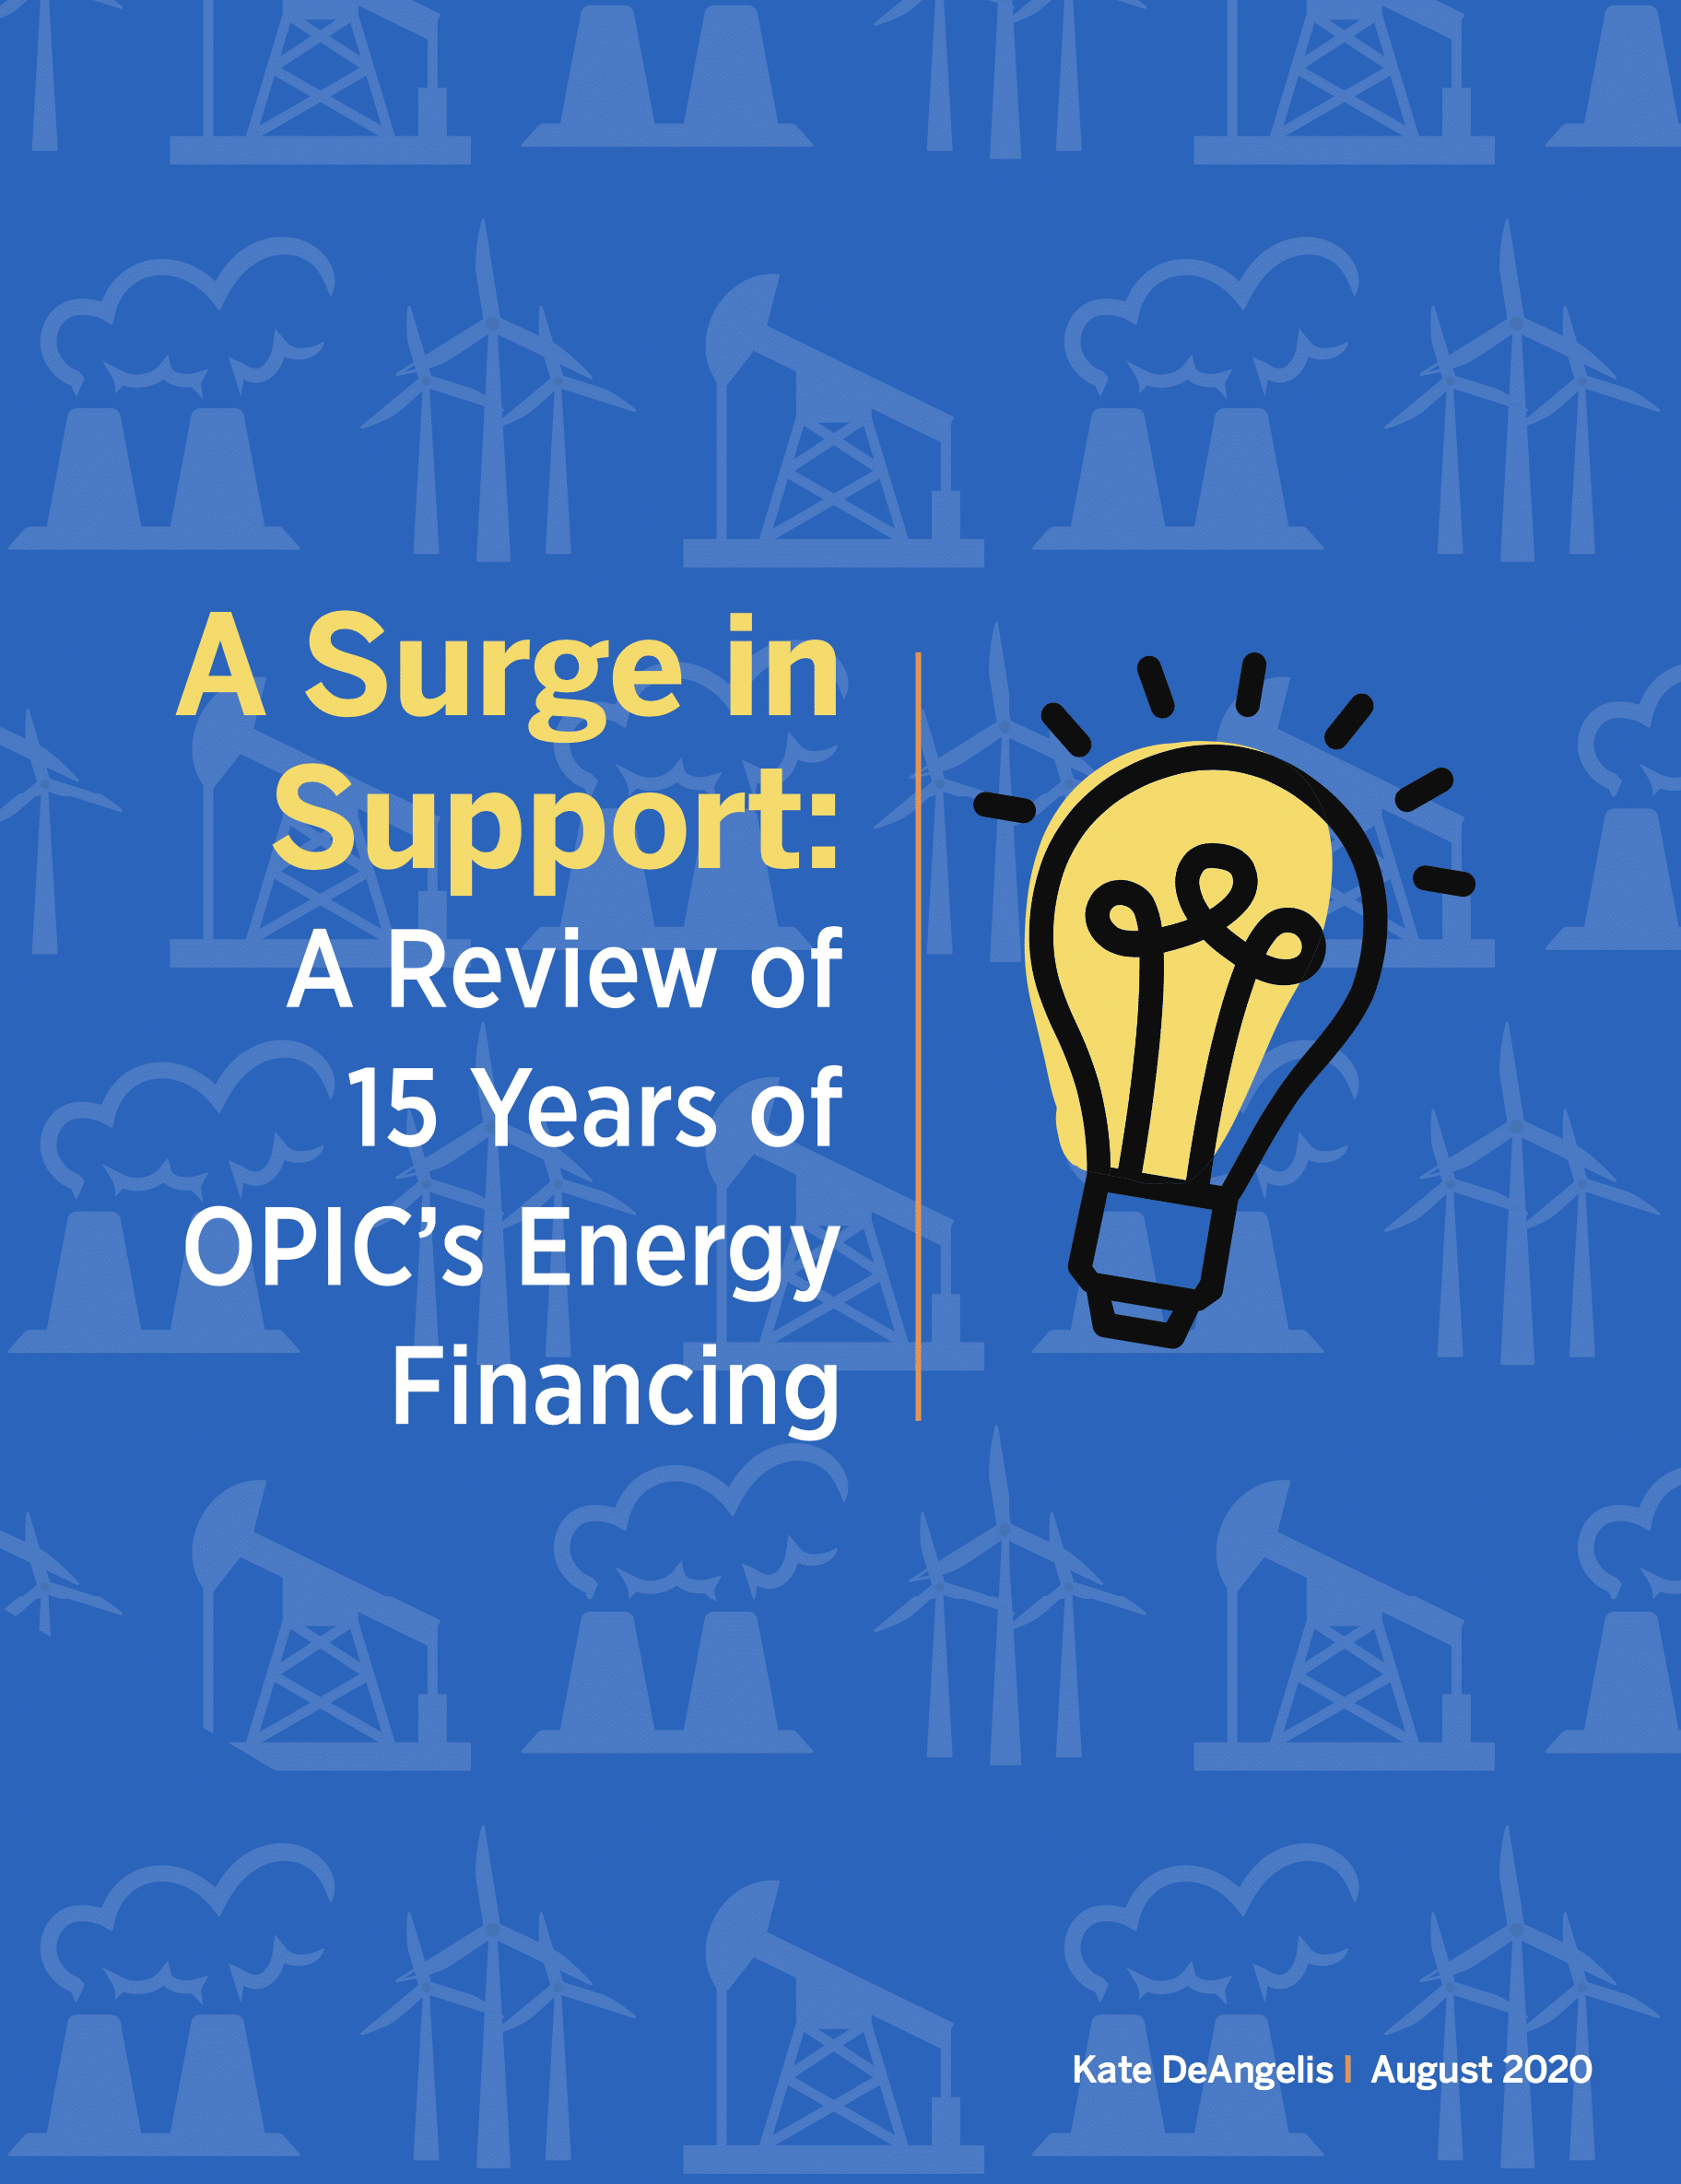 A Surge in Support: A Review of 15 Years of OPIC’s Energy Financing